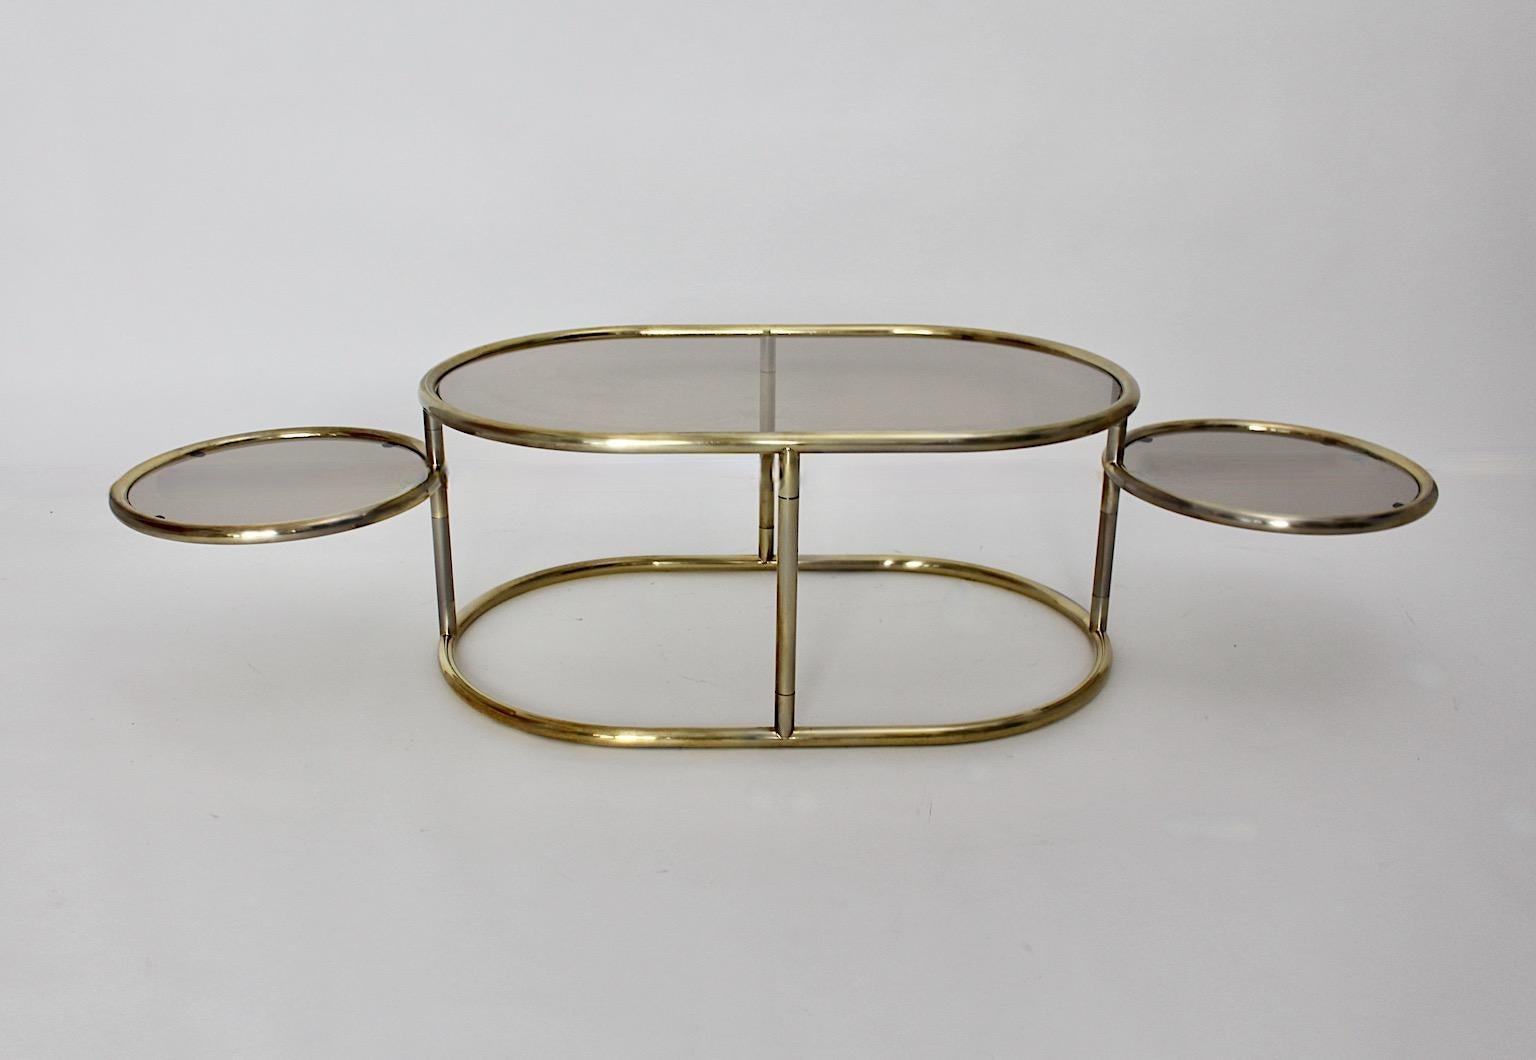 Modernist Vintage Golden Metal Glass Oval Coffee Table Sofa Table, 1960s, Italy For Sale 2